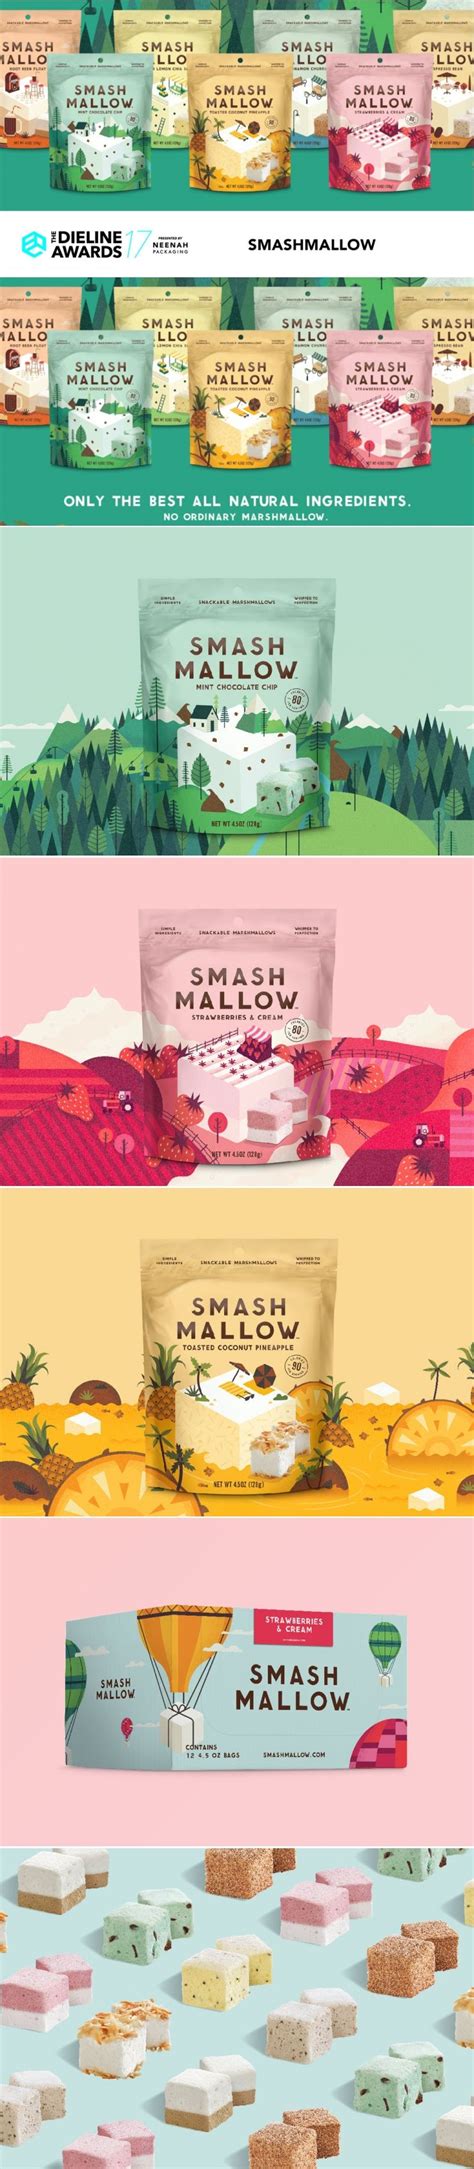 The Dieline Awards 2017 Outstanding Achievements Smashmellow — The